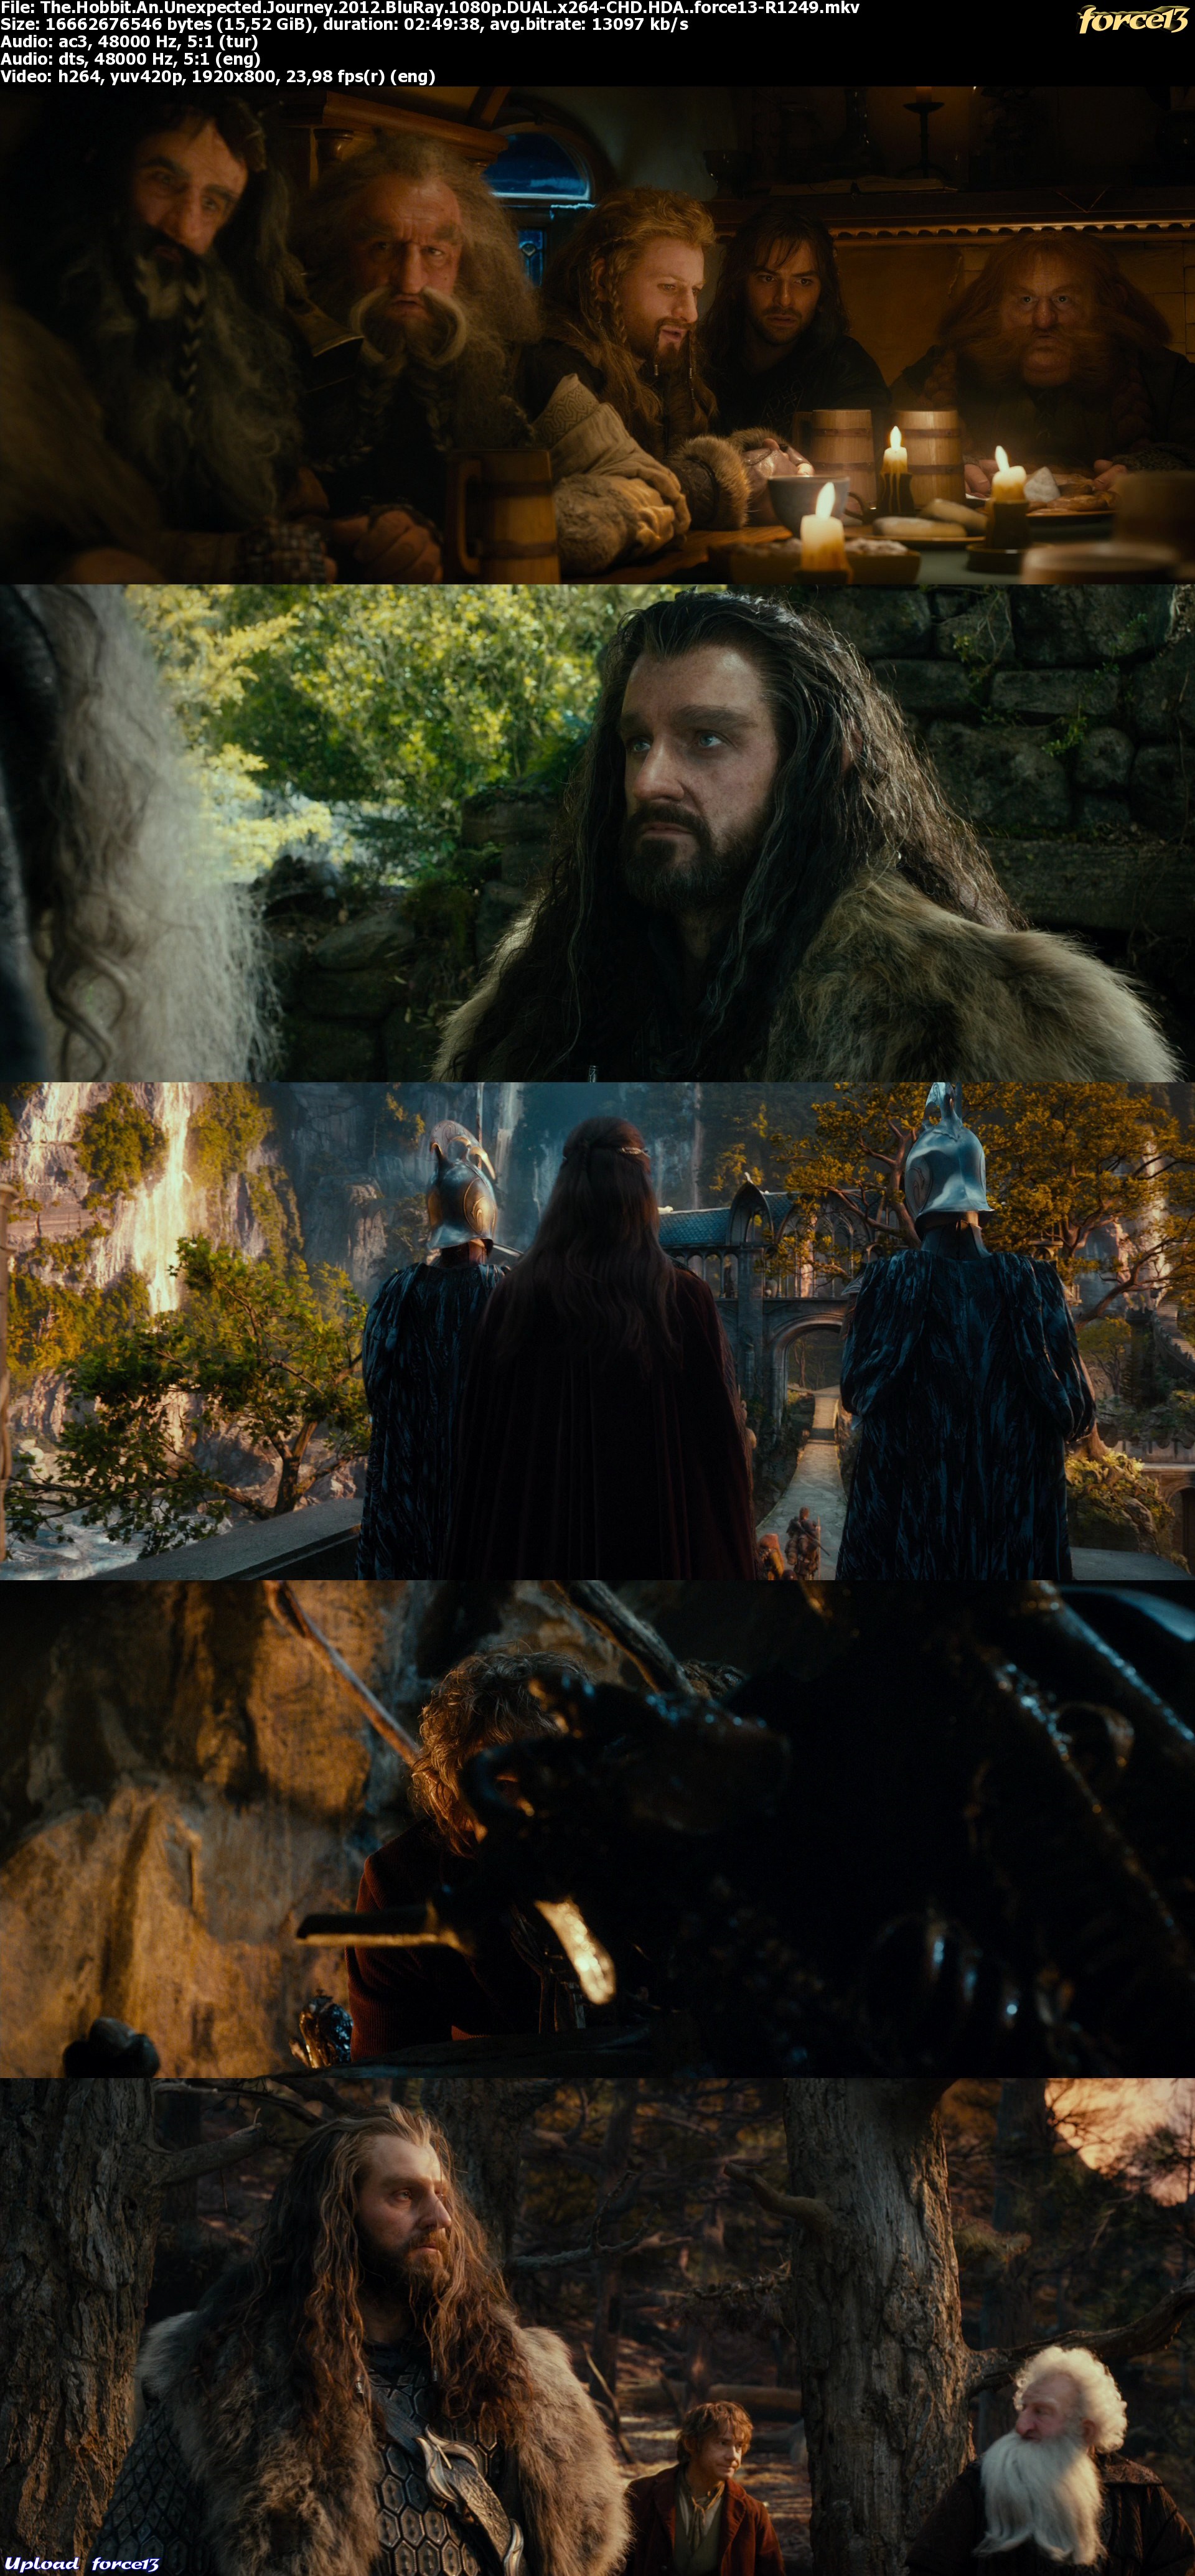 The Hobbit: An Unexpected Journey YIFY subtitles